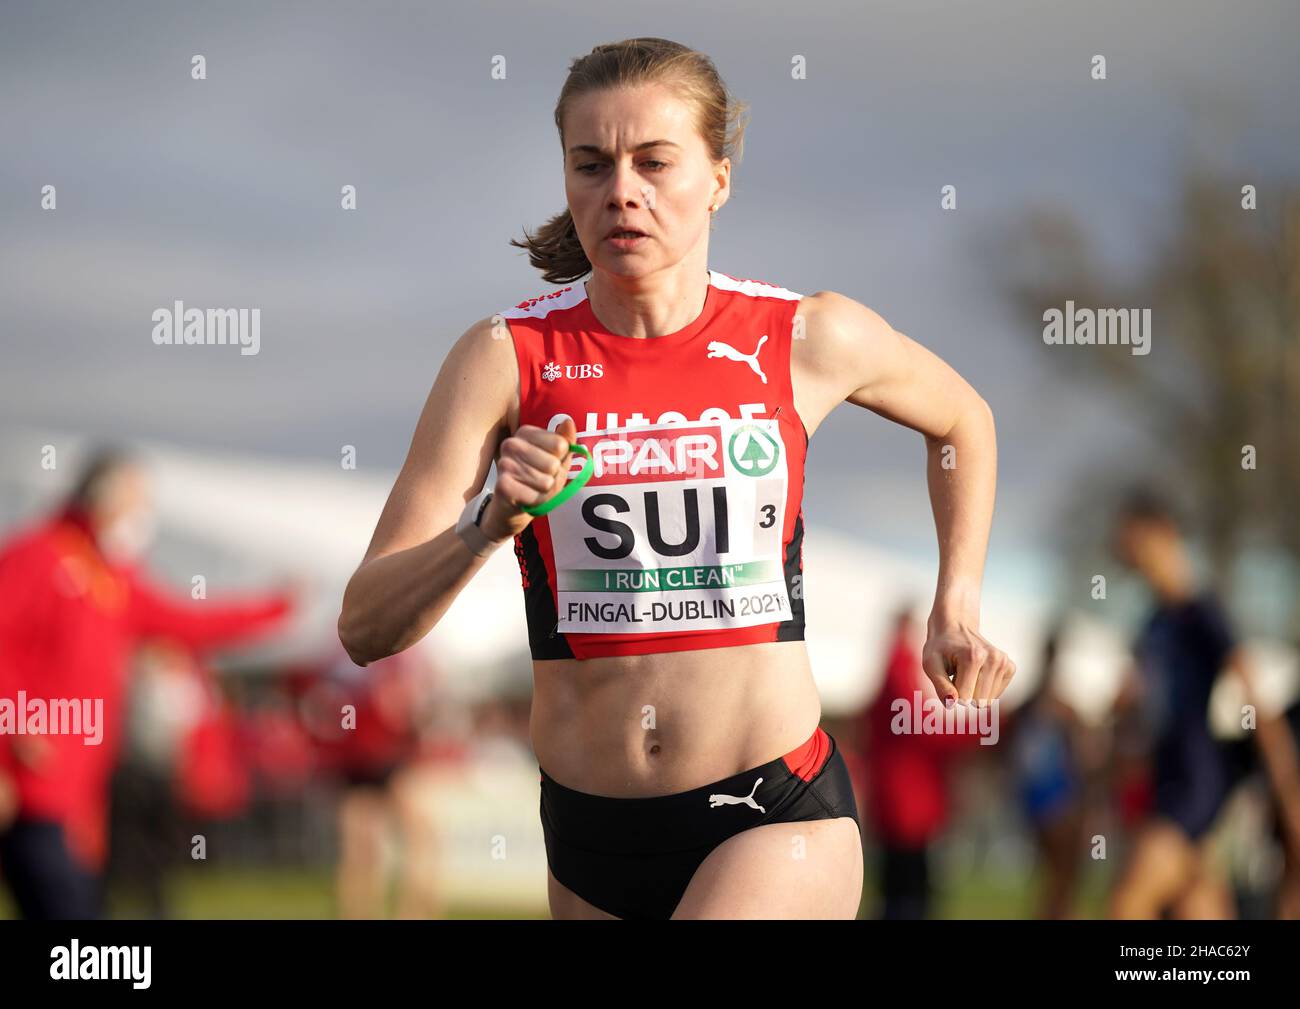 Switzerland's Selina Fehler in action during the Mixed Relay event during the SPAR European Cross Country Championships 2021 at Fingal-Dublin in Ireland. Picture date: Sunday December 12, 2021. Stock Photo